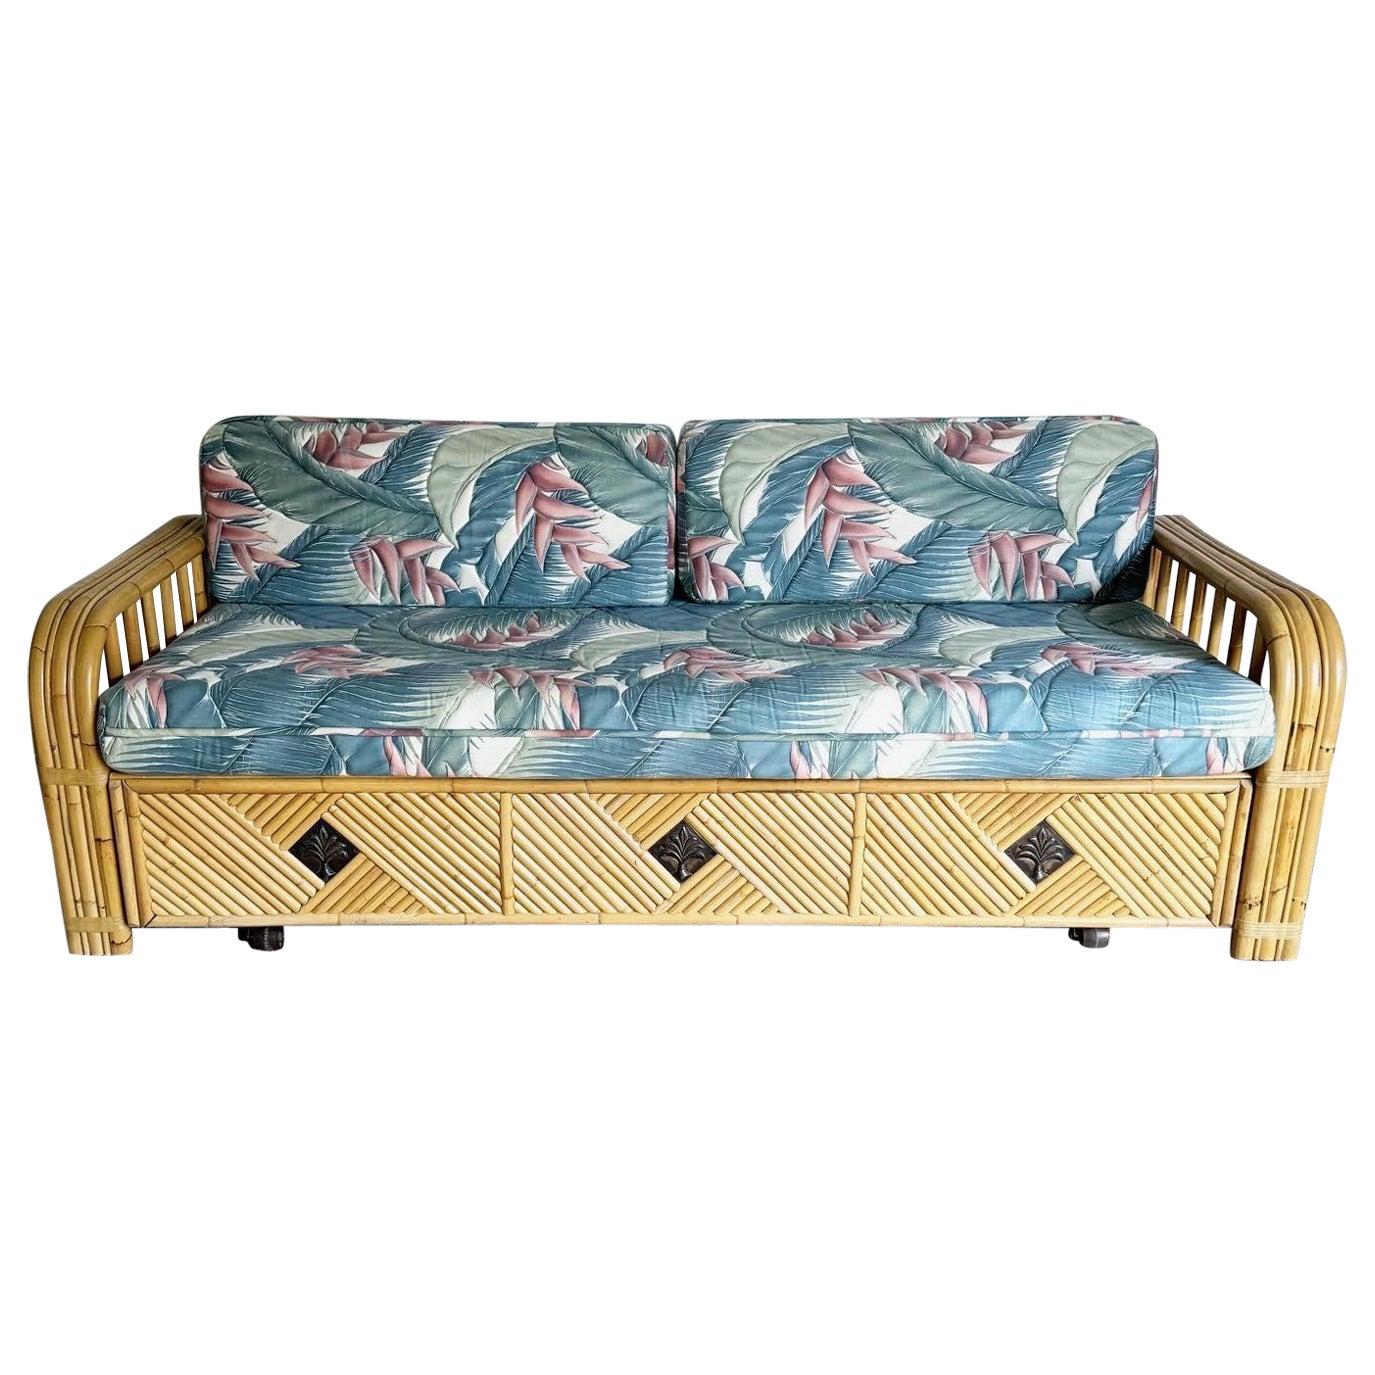 Boho Chic Bamboo Rattan Day Bed With Pull Out Trundle For Sale